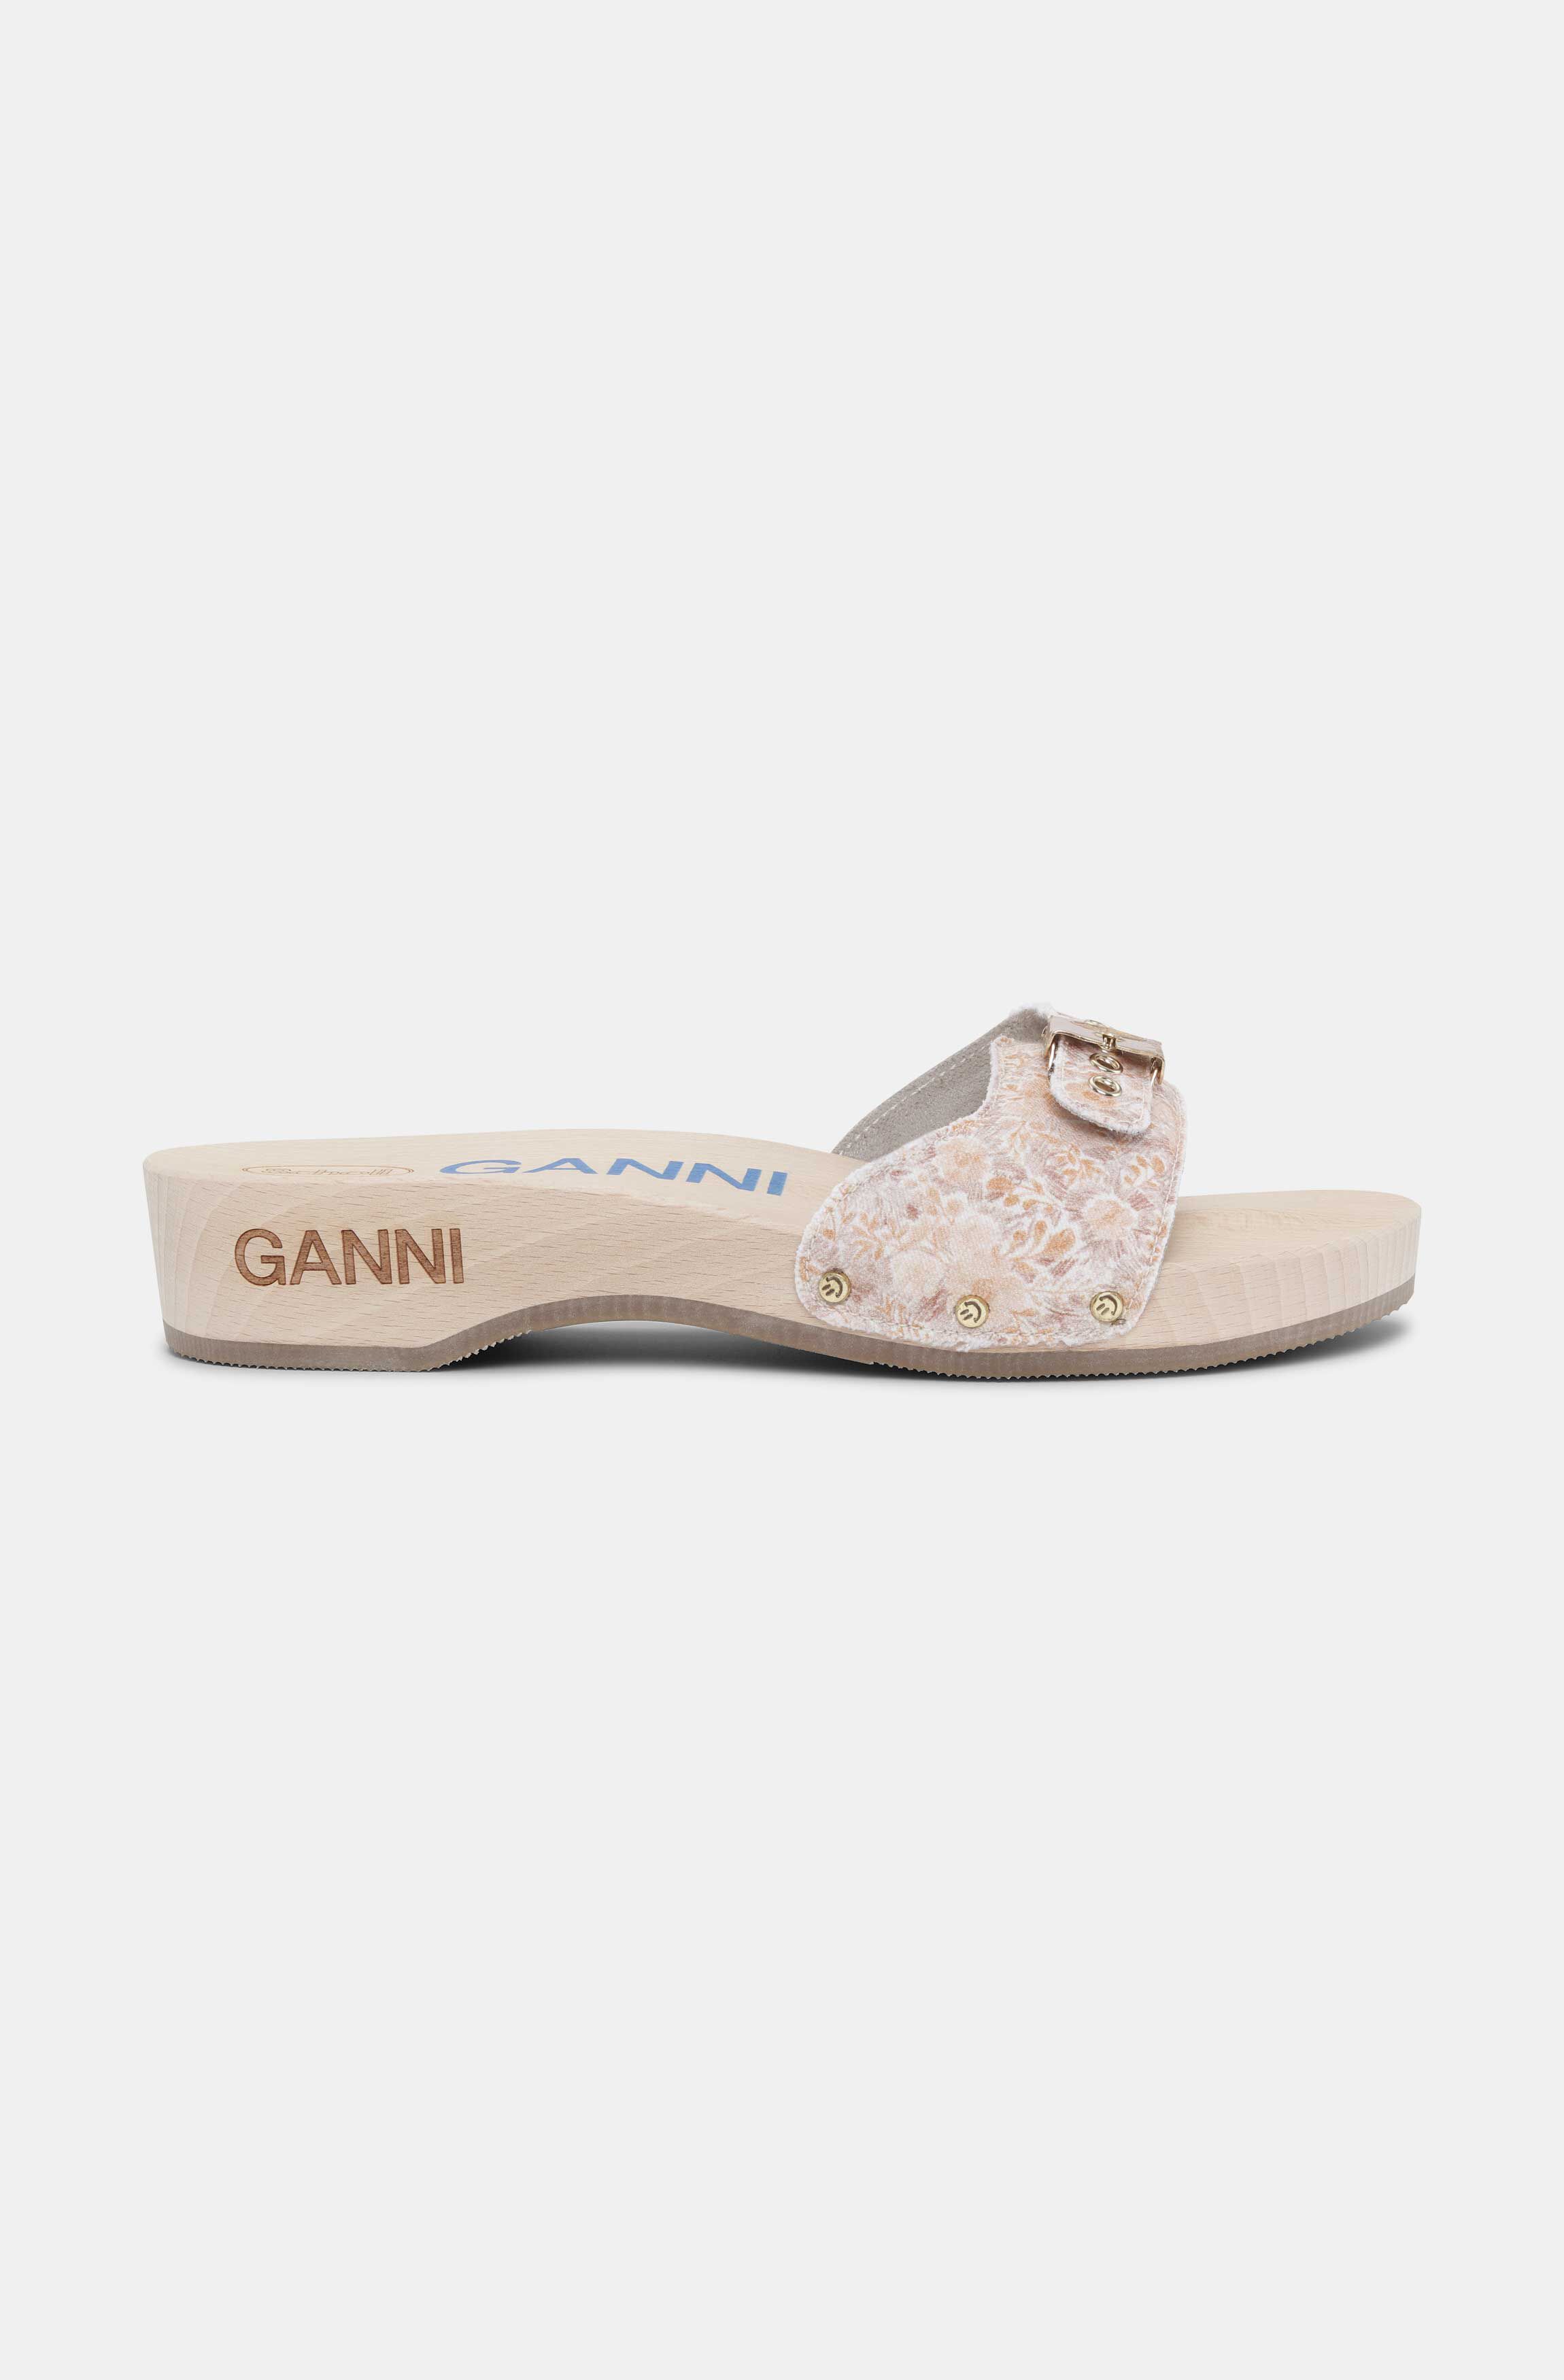 GANNI Collections | Latest Releases & Exclusives | GANNI US